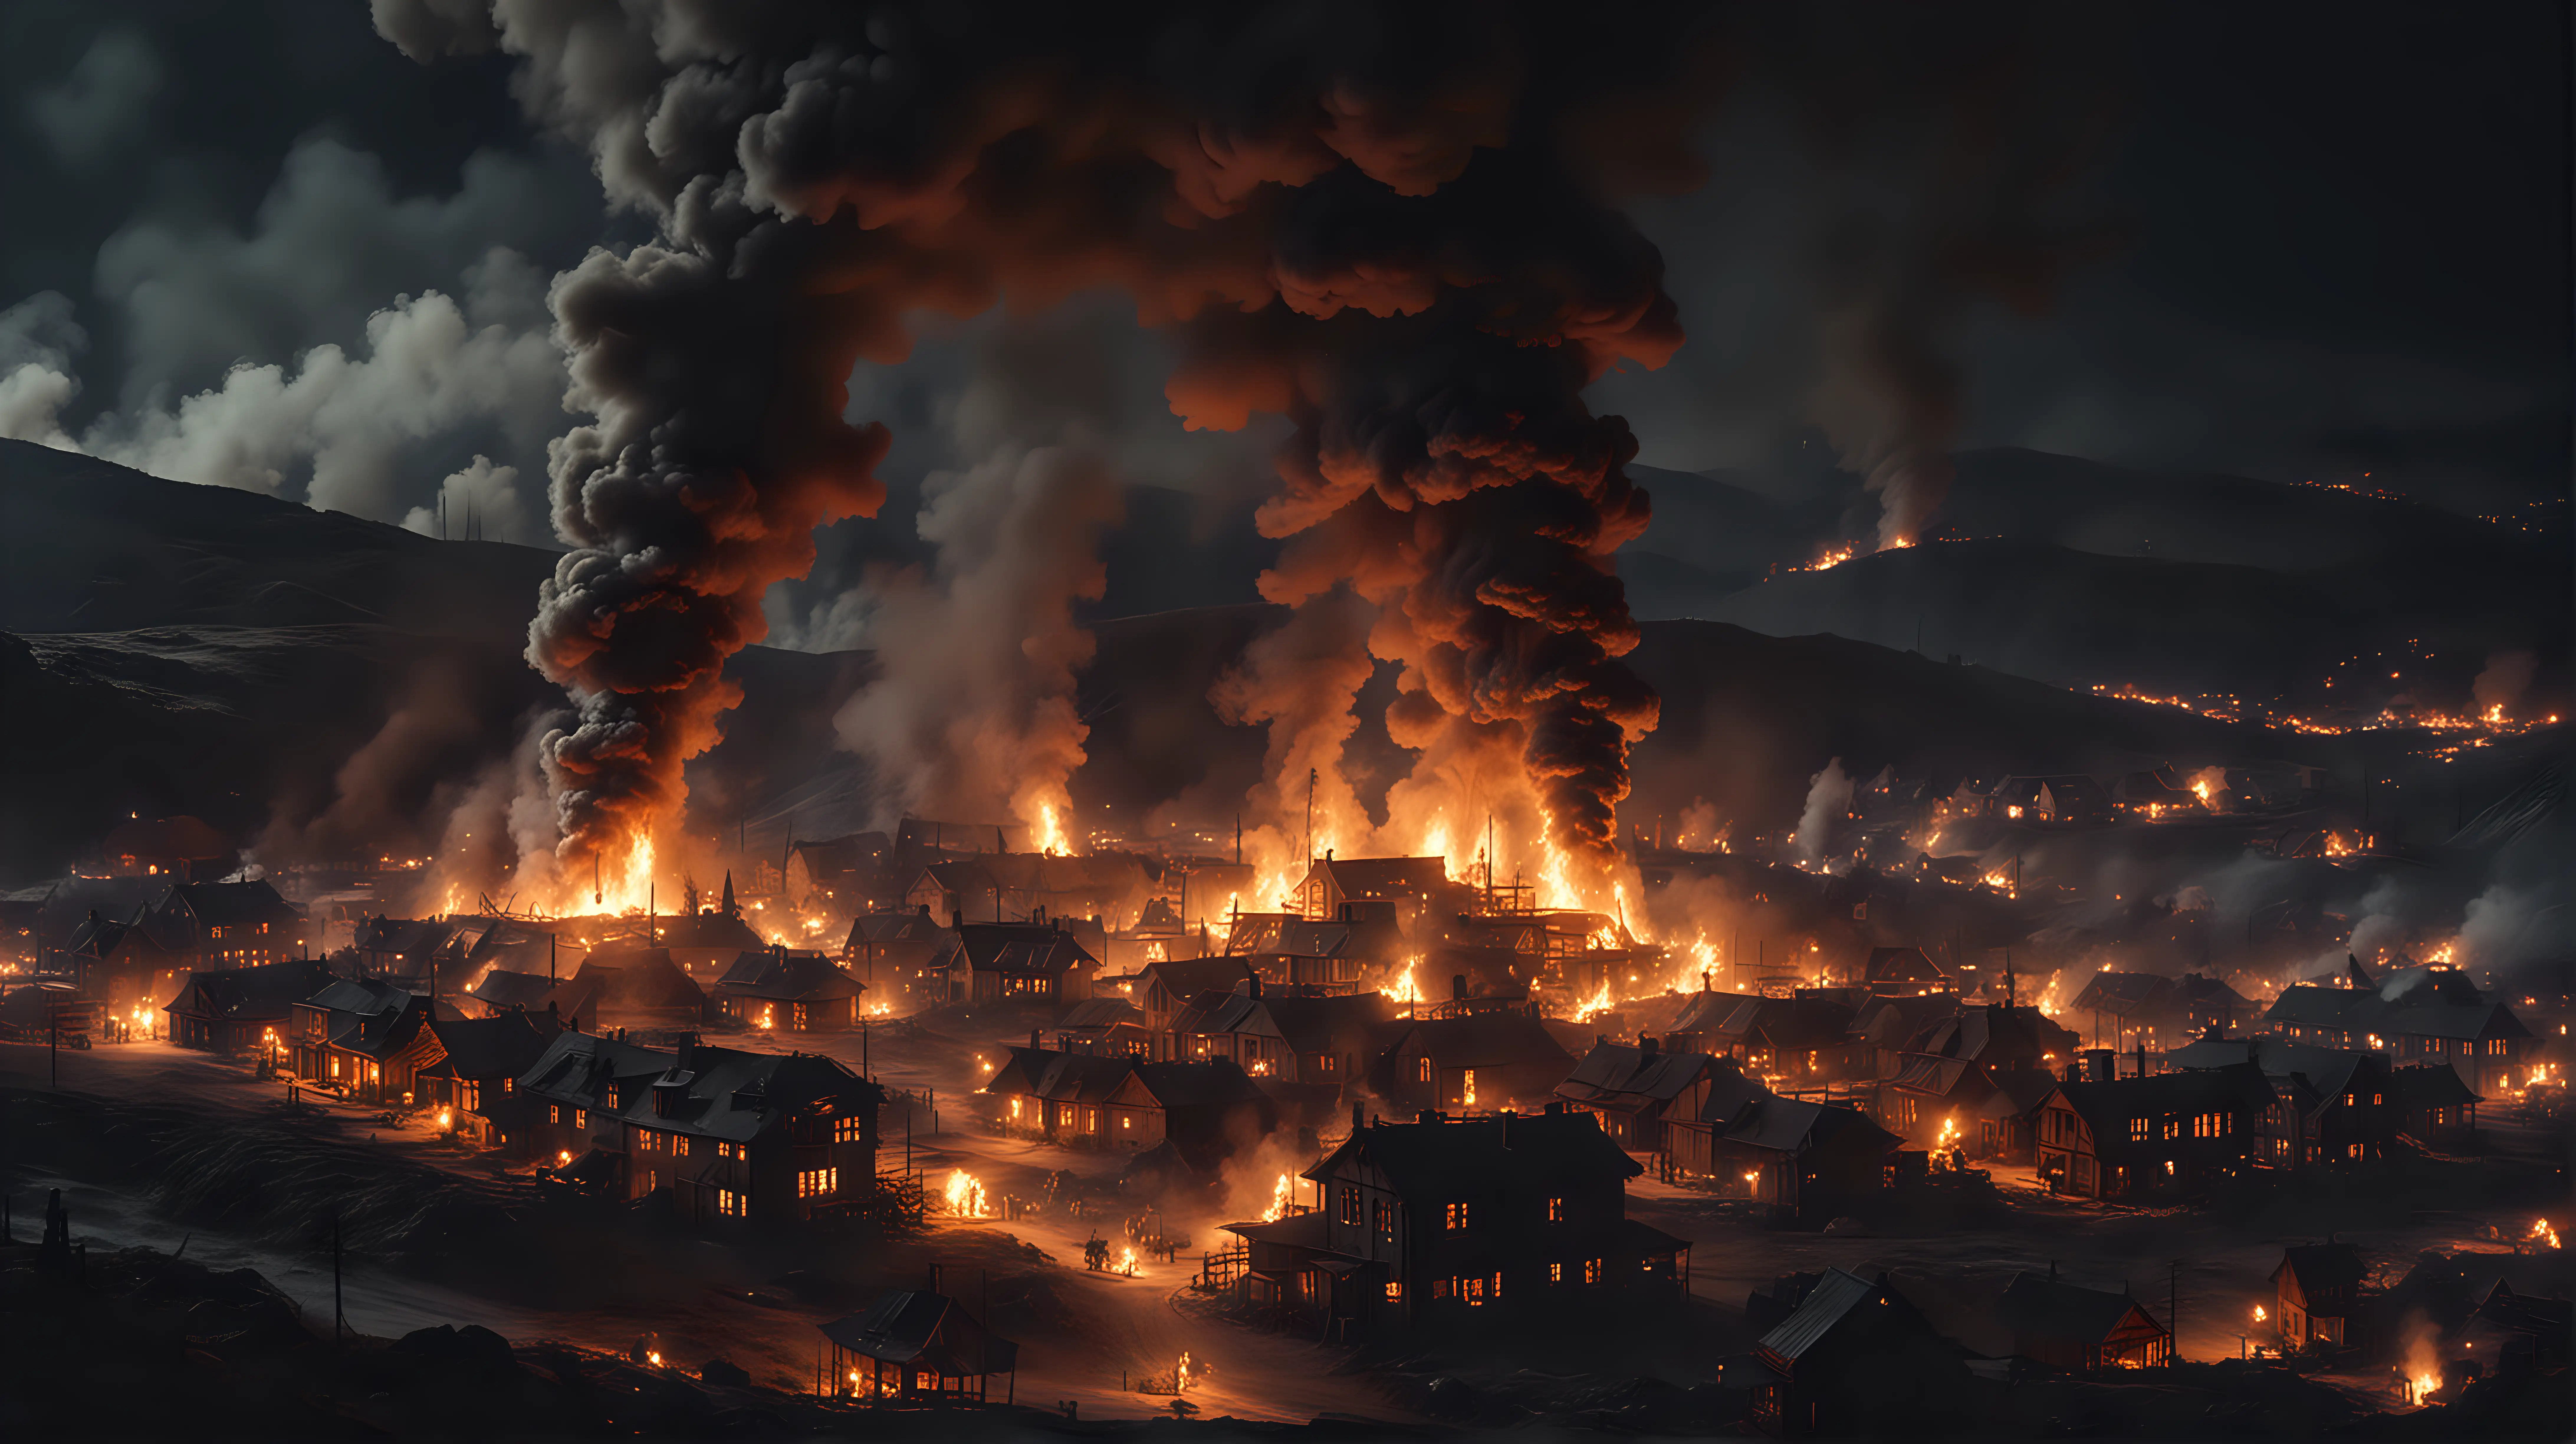 Large fire in a small steampunk village in the wilderness, flames, smoke, steam, dark night, distant view from a high mount